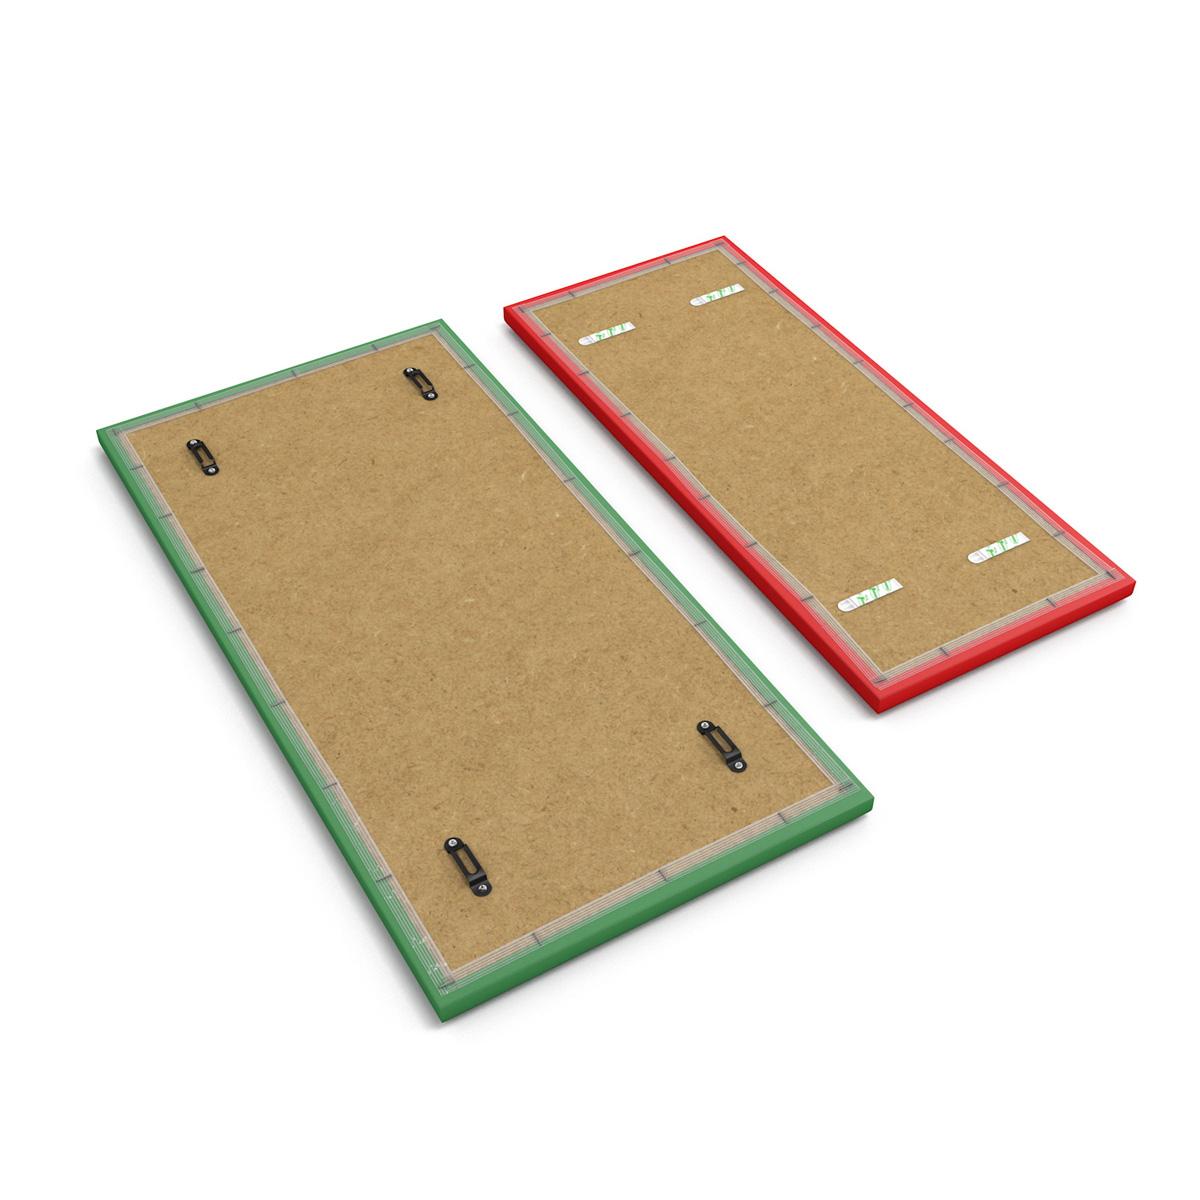 STRATOS™ Rectangle Acoustic Panelling Easy-Fix Mounting Options Includes 3m Command Velcro Strips or Keyhole Brackets